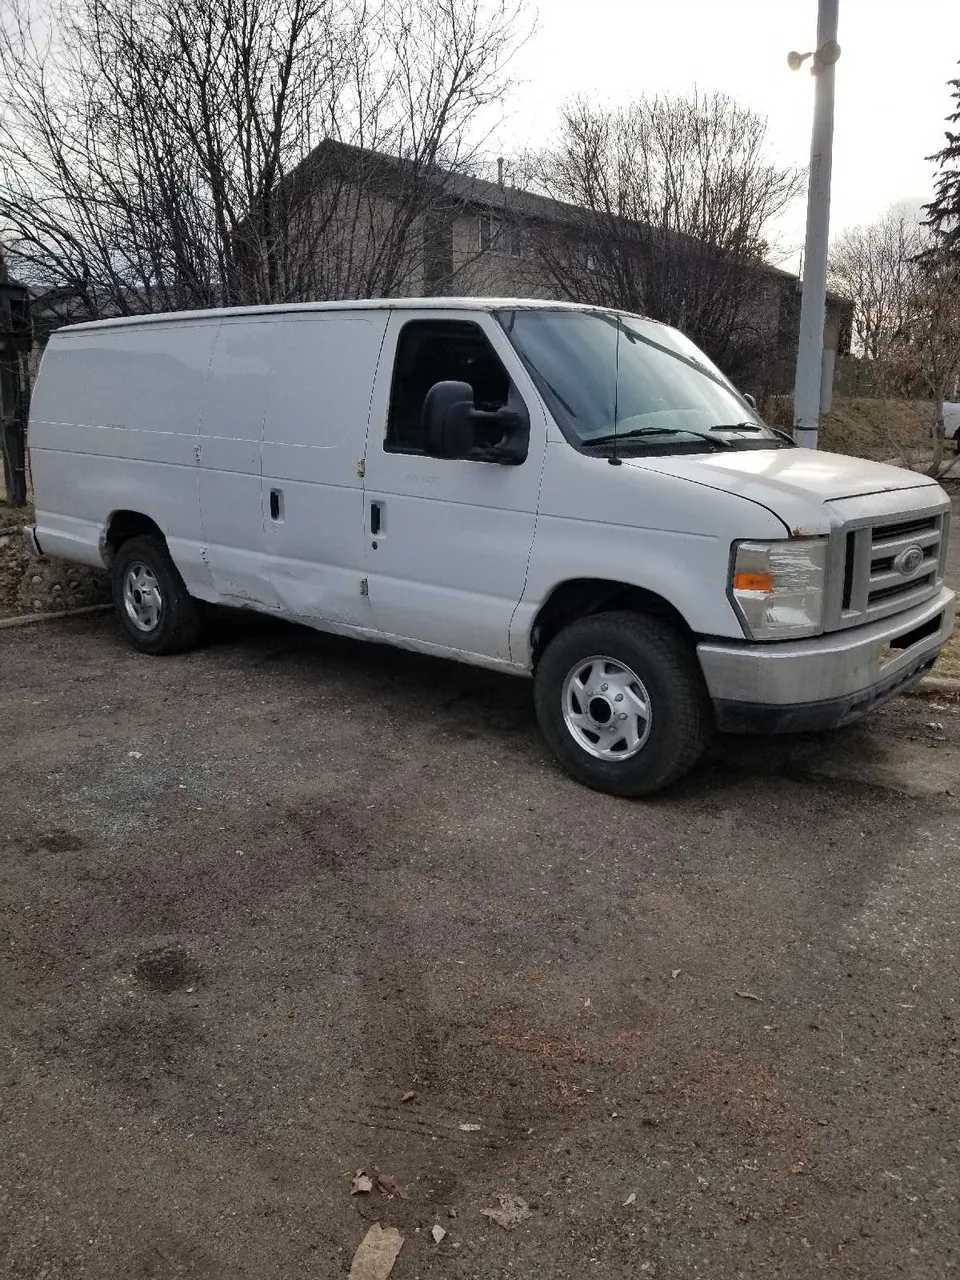 Ford Econoline 2009 for sale $4000